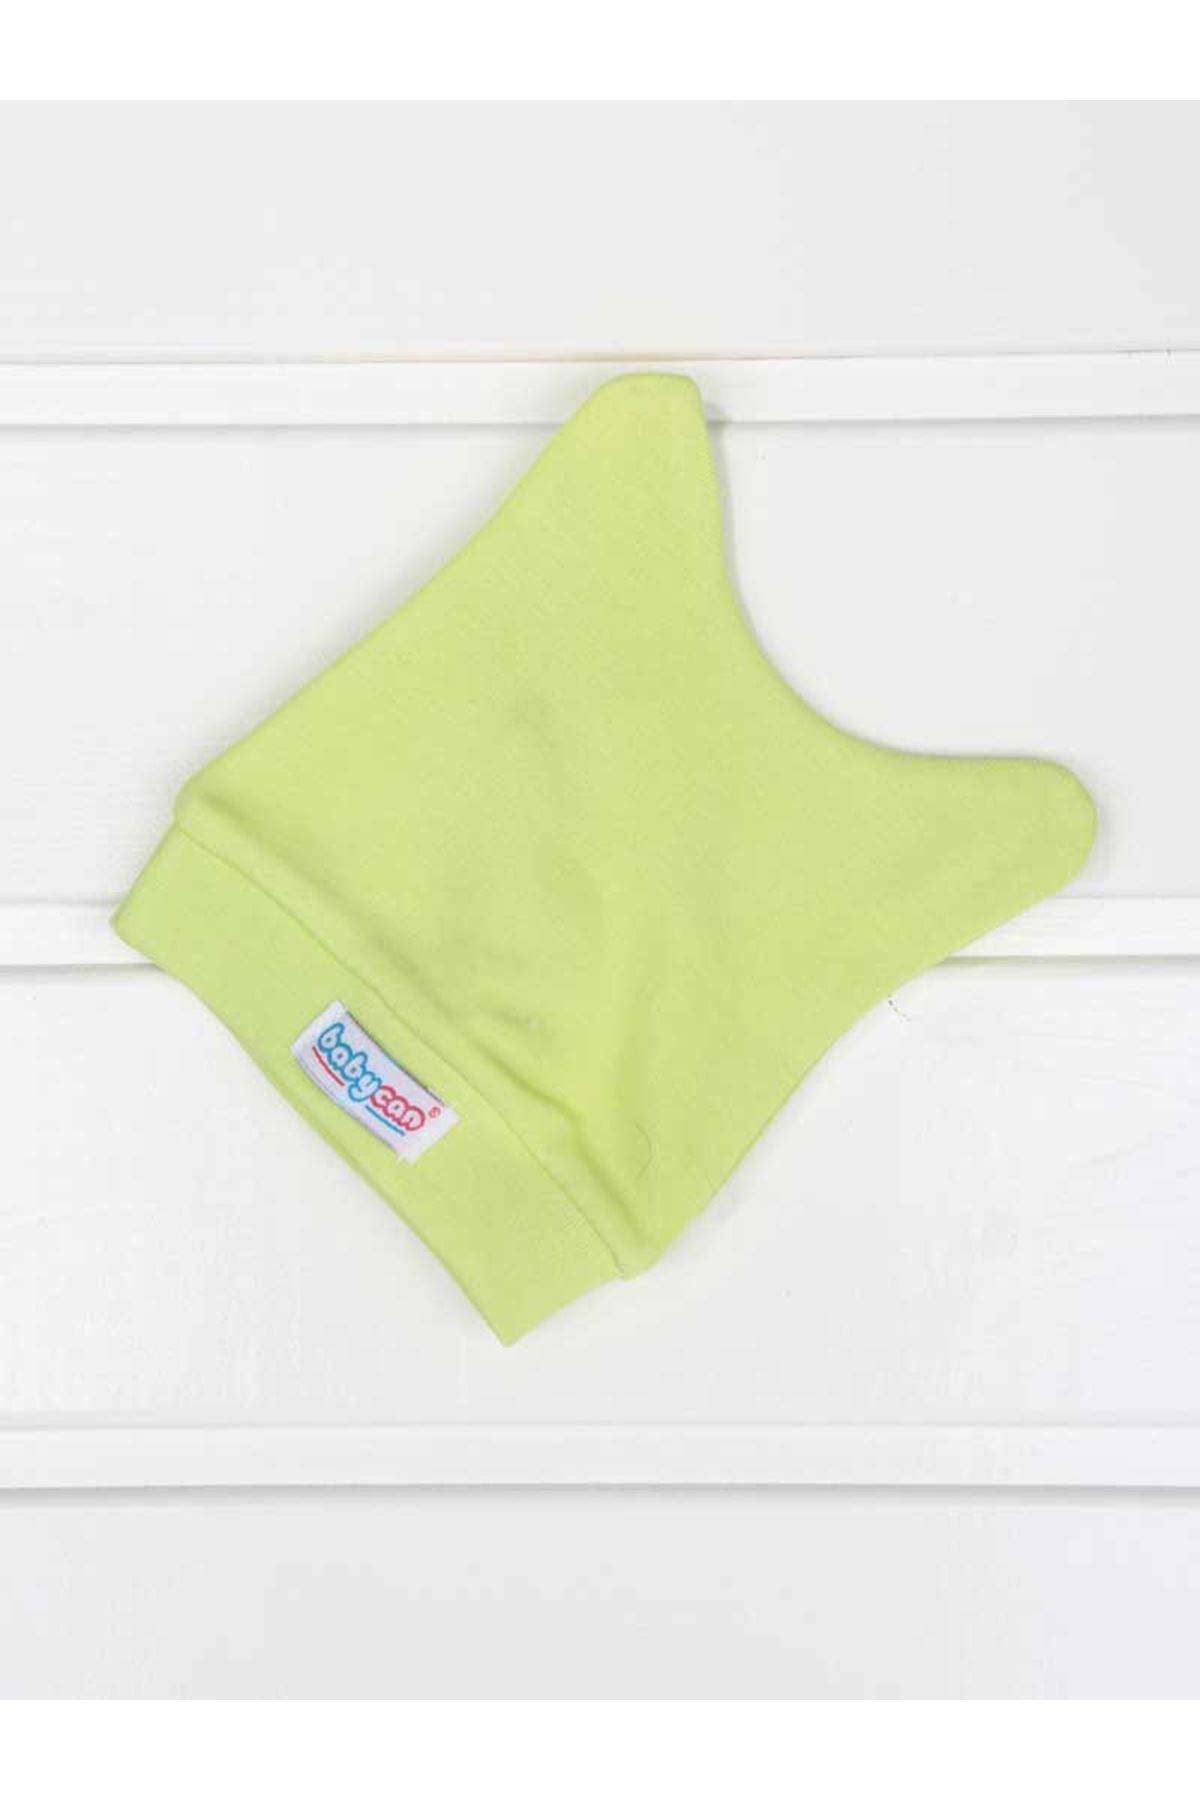 Green Swaddle Gloved Male Baby 3 Pcs The Zibin team